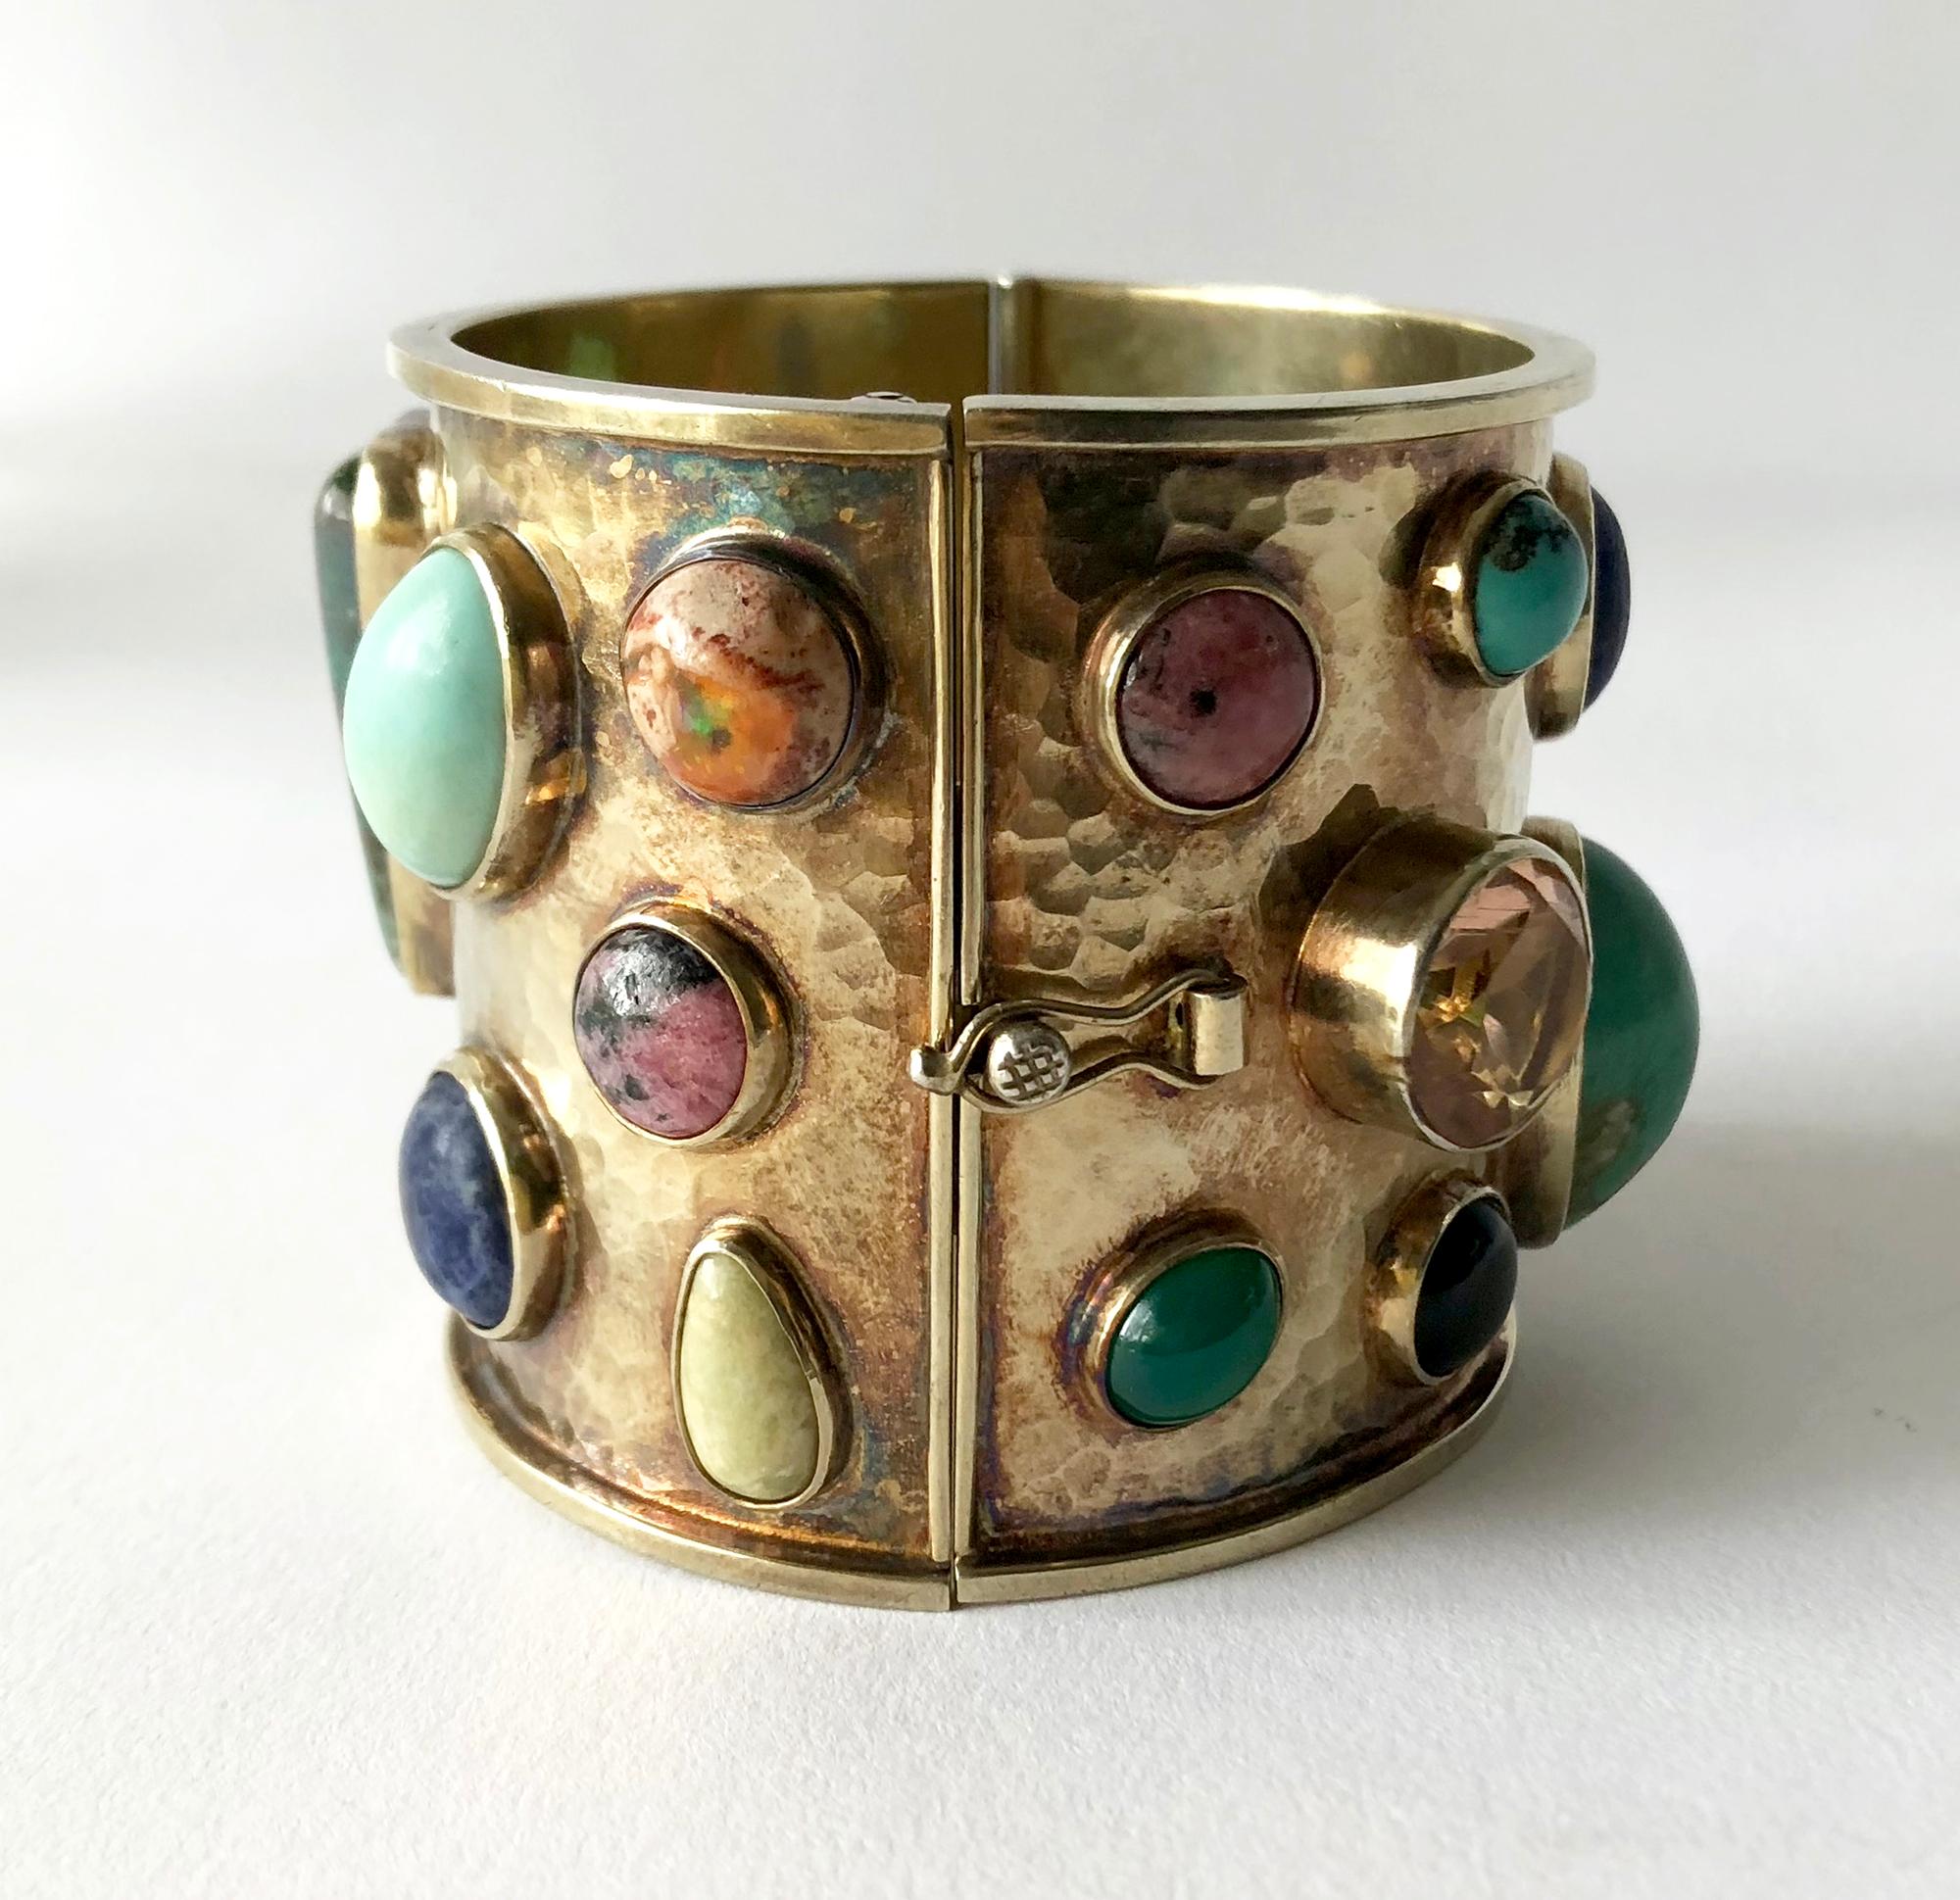 Multi colored semi-precious gemstones set in a sterling silver hinged cuff, created by Celia Harms of Mexico.  Each stone is bezel set within a hand hammered silver, gold washed bracelet.  Bracelet has a wearable wrist length of 6.75